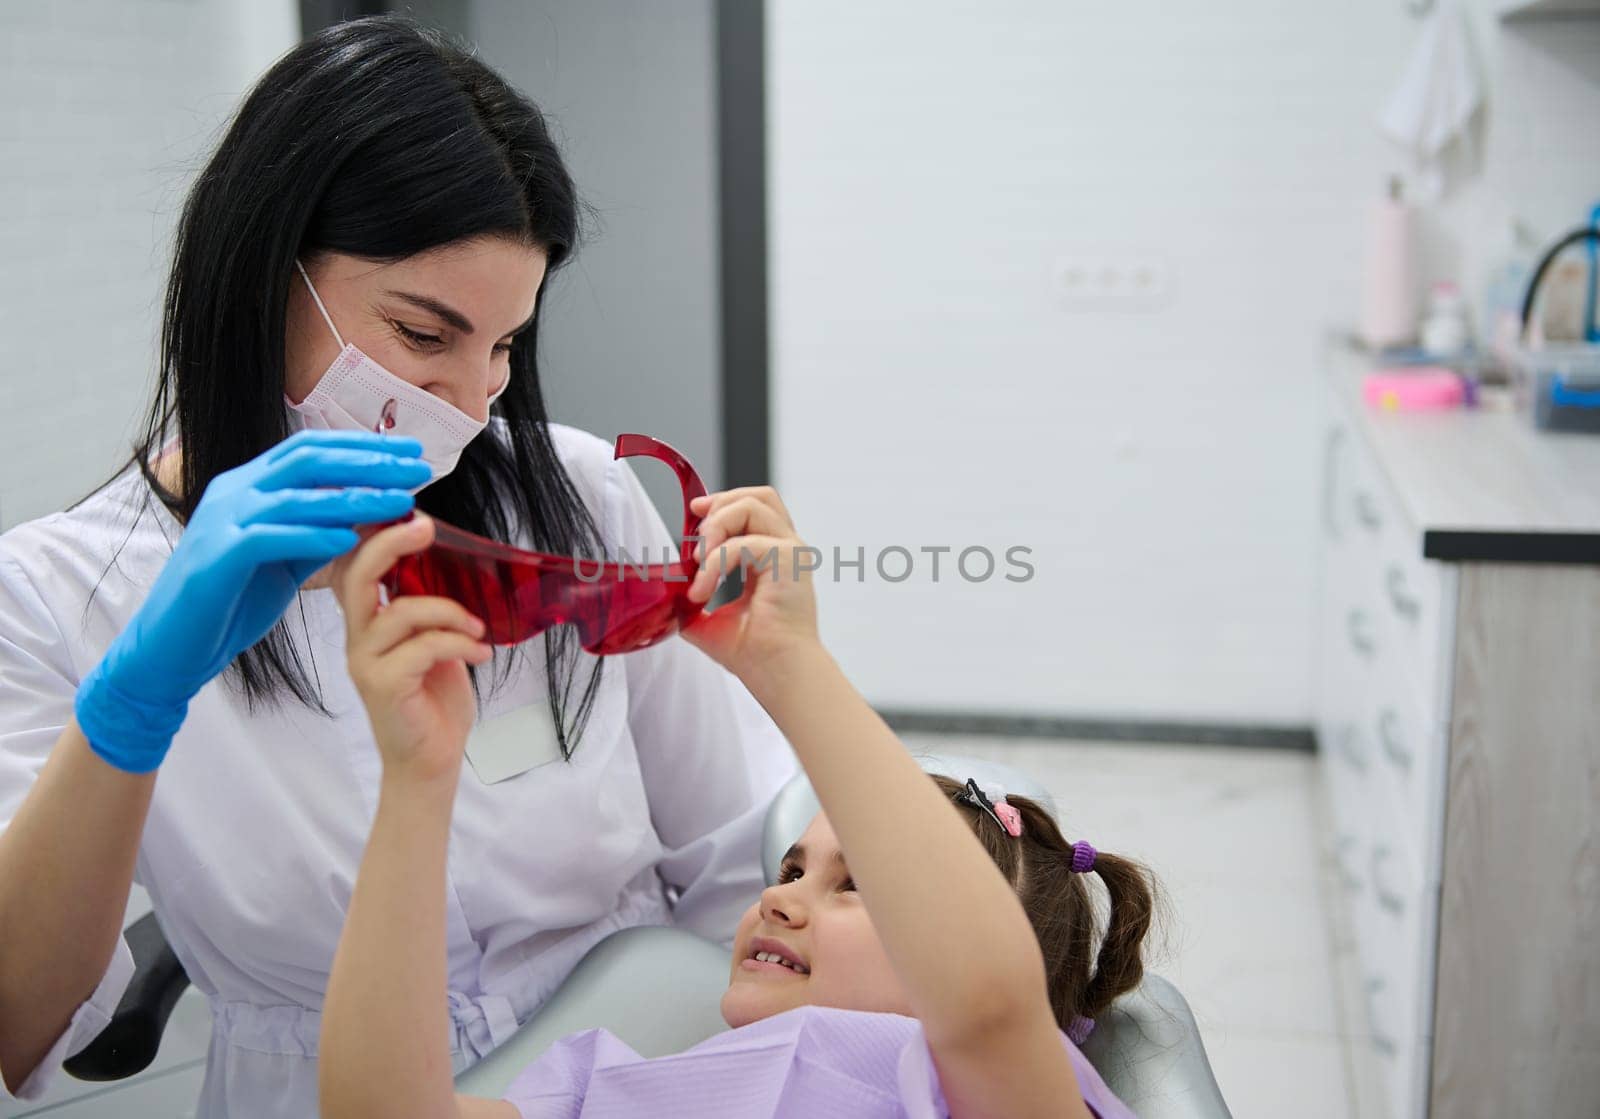 Pediatric dentistry. Dental practice. Pleasant female dentist doctor talking to a little patient before dental check up by artgf